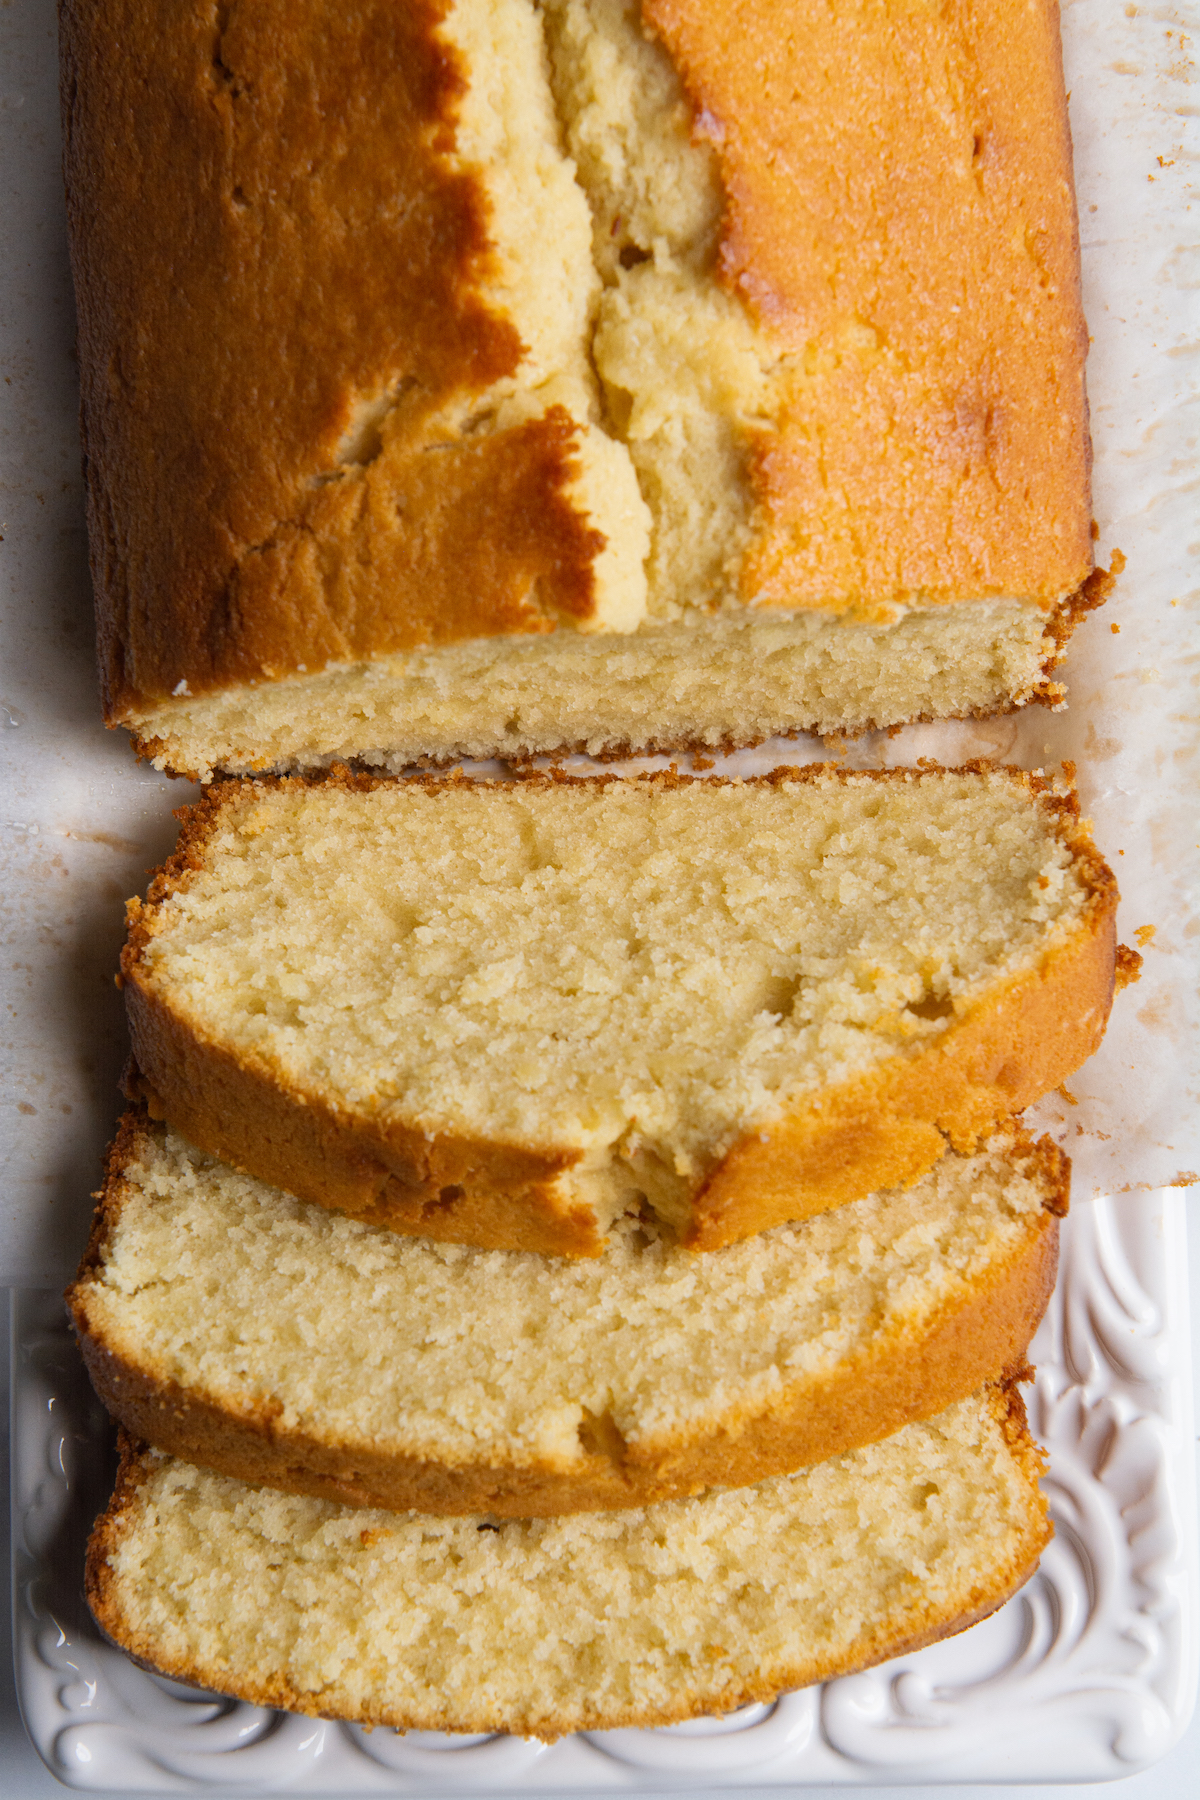 A loaf of pound cake cut into slices.